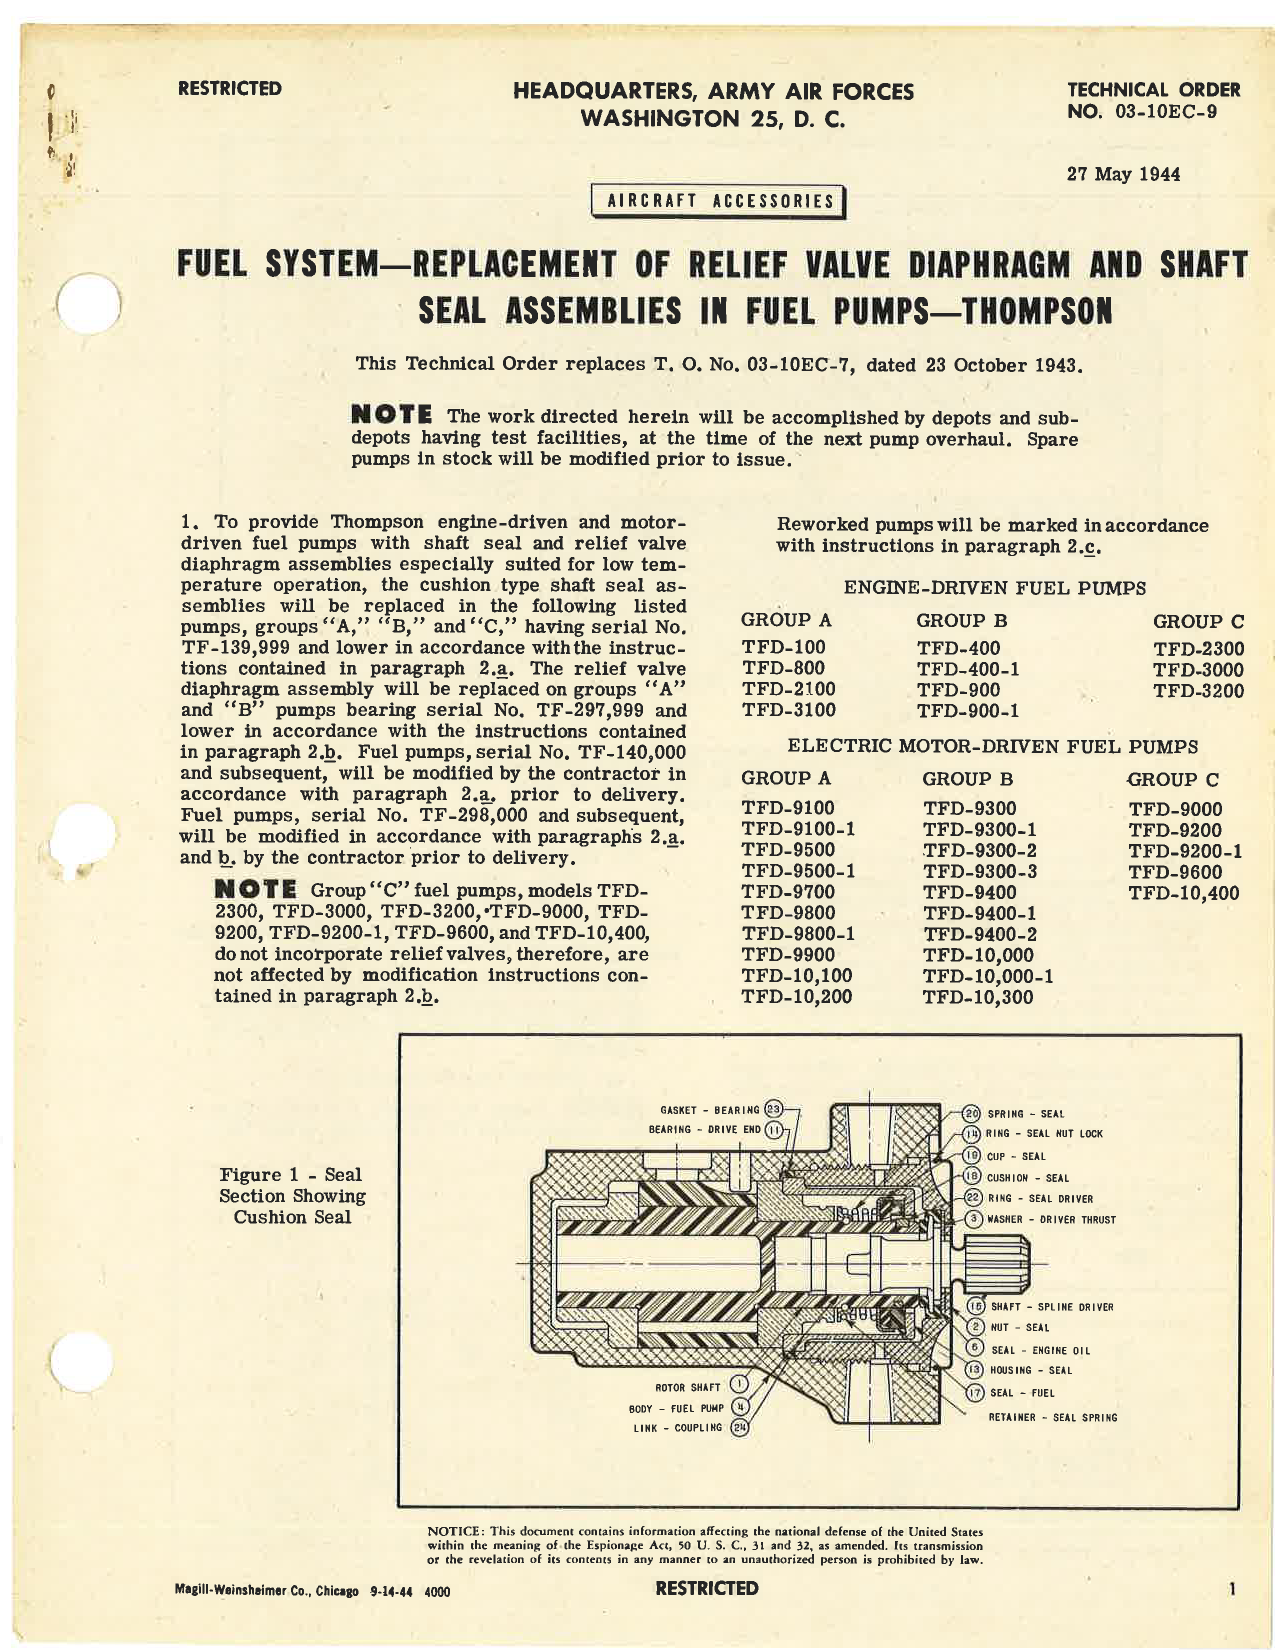 Sample page 1 from AirCorps Library document: Replacement of Relief Valve Diaphragm and Shaft Seal Assemblies in Fuel Pumps